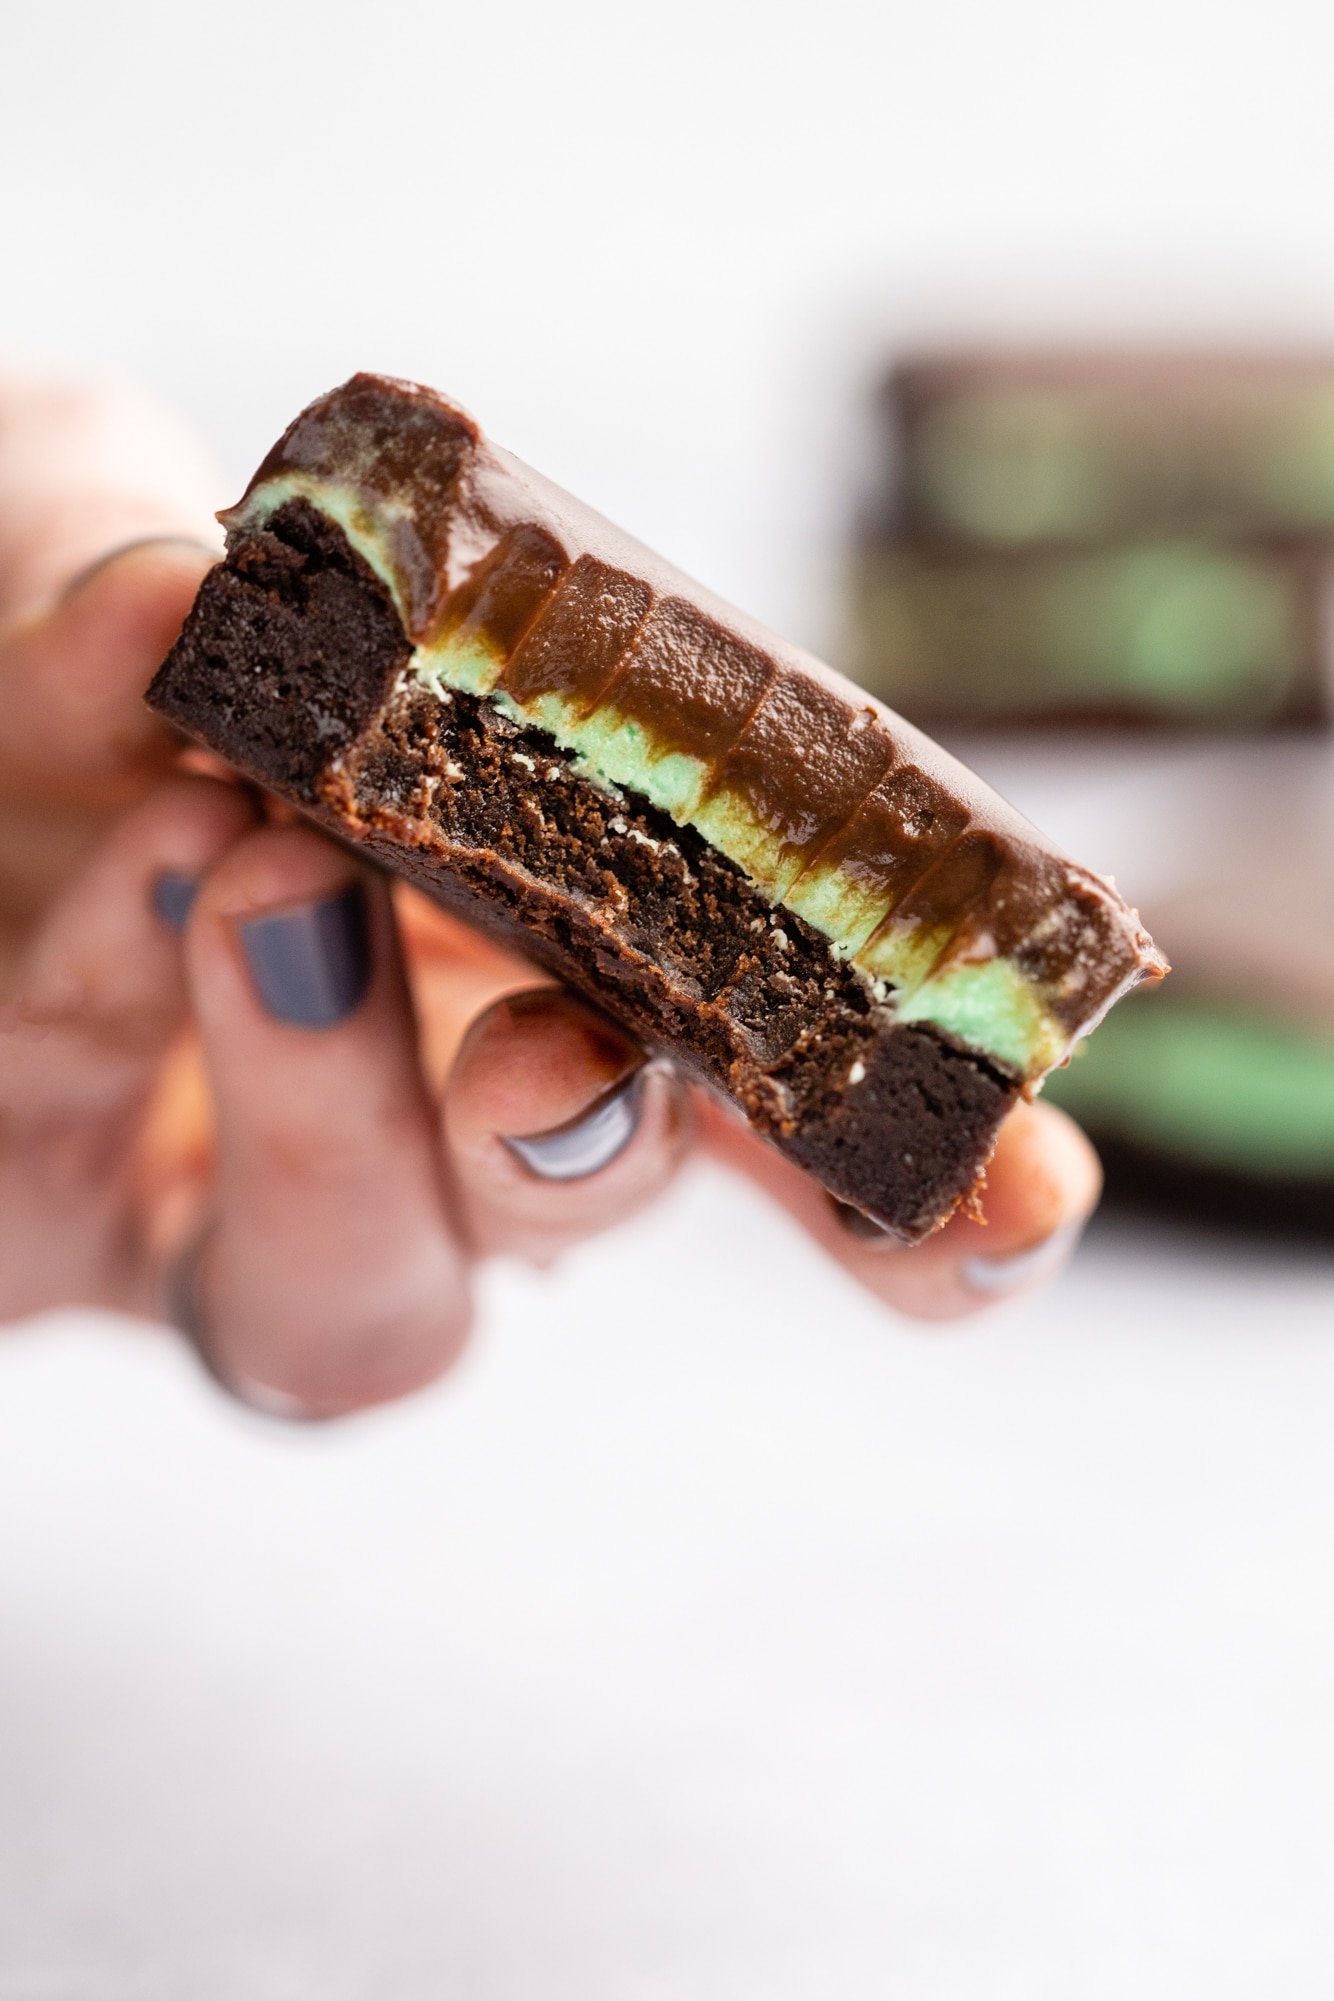 womans hand holding a chocolate mint brownie with a bite taken out of it.